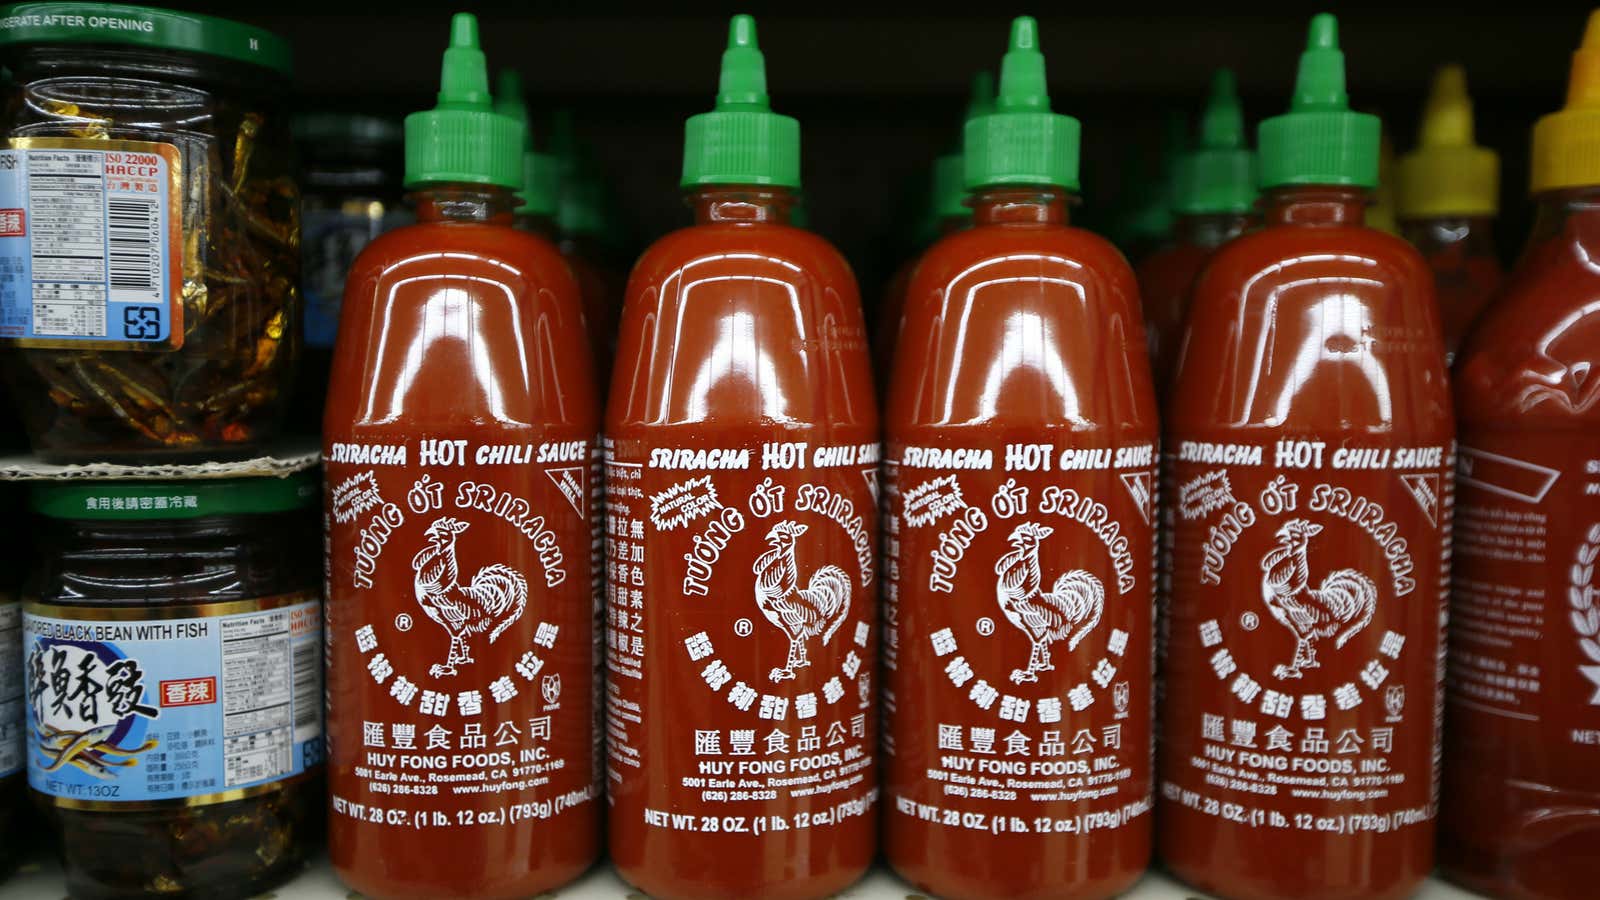 Better bring hot sauce in your bag…swag.